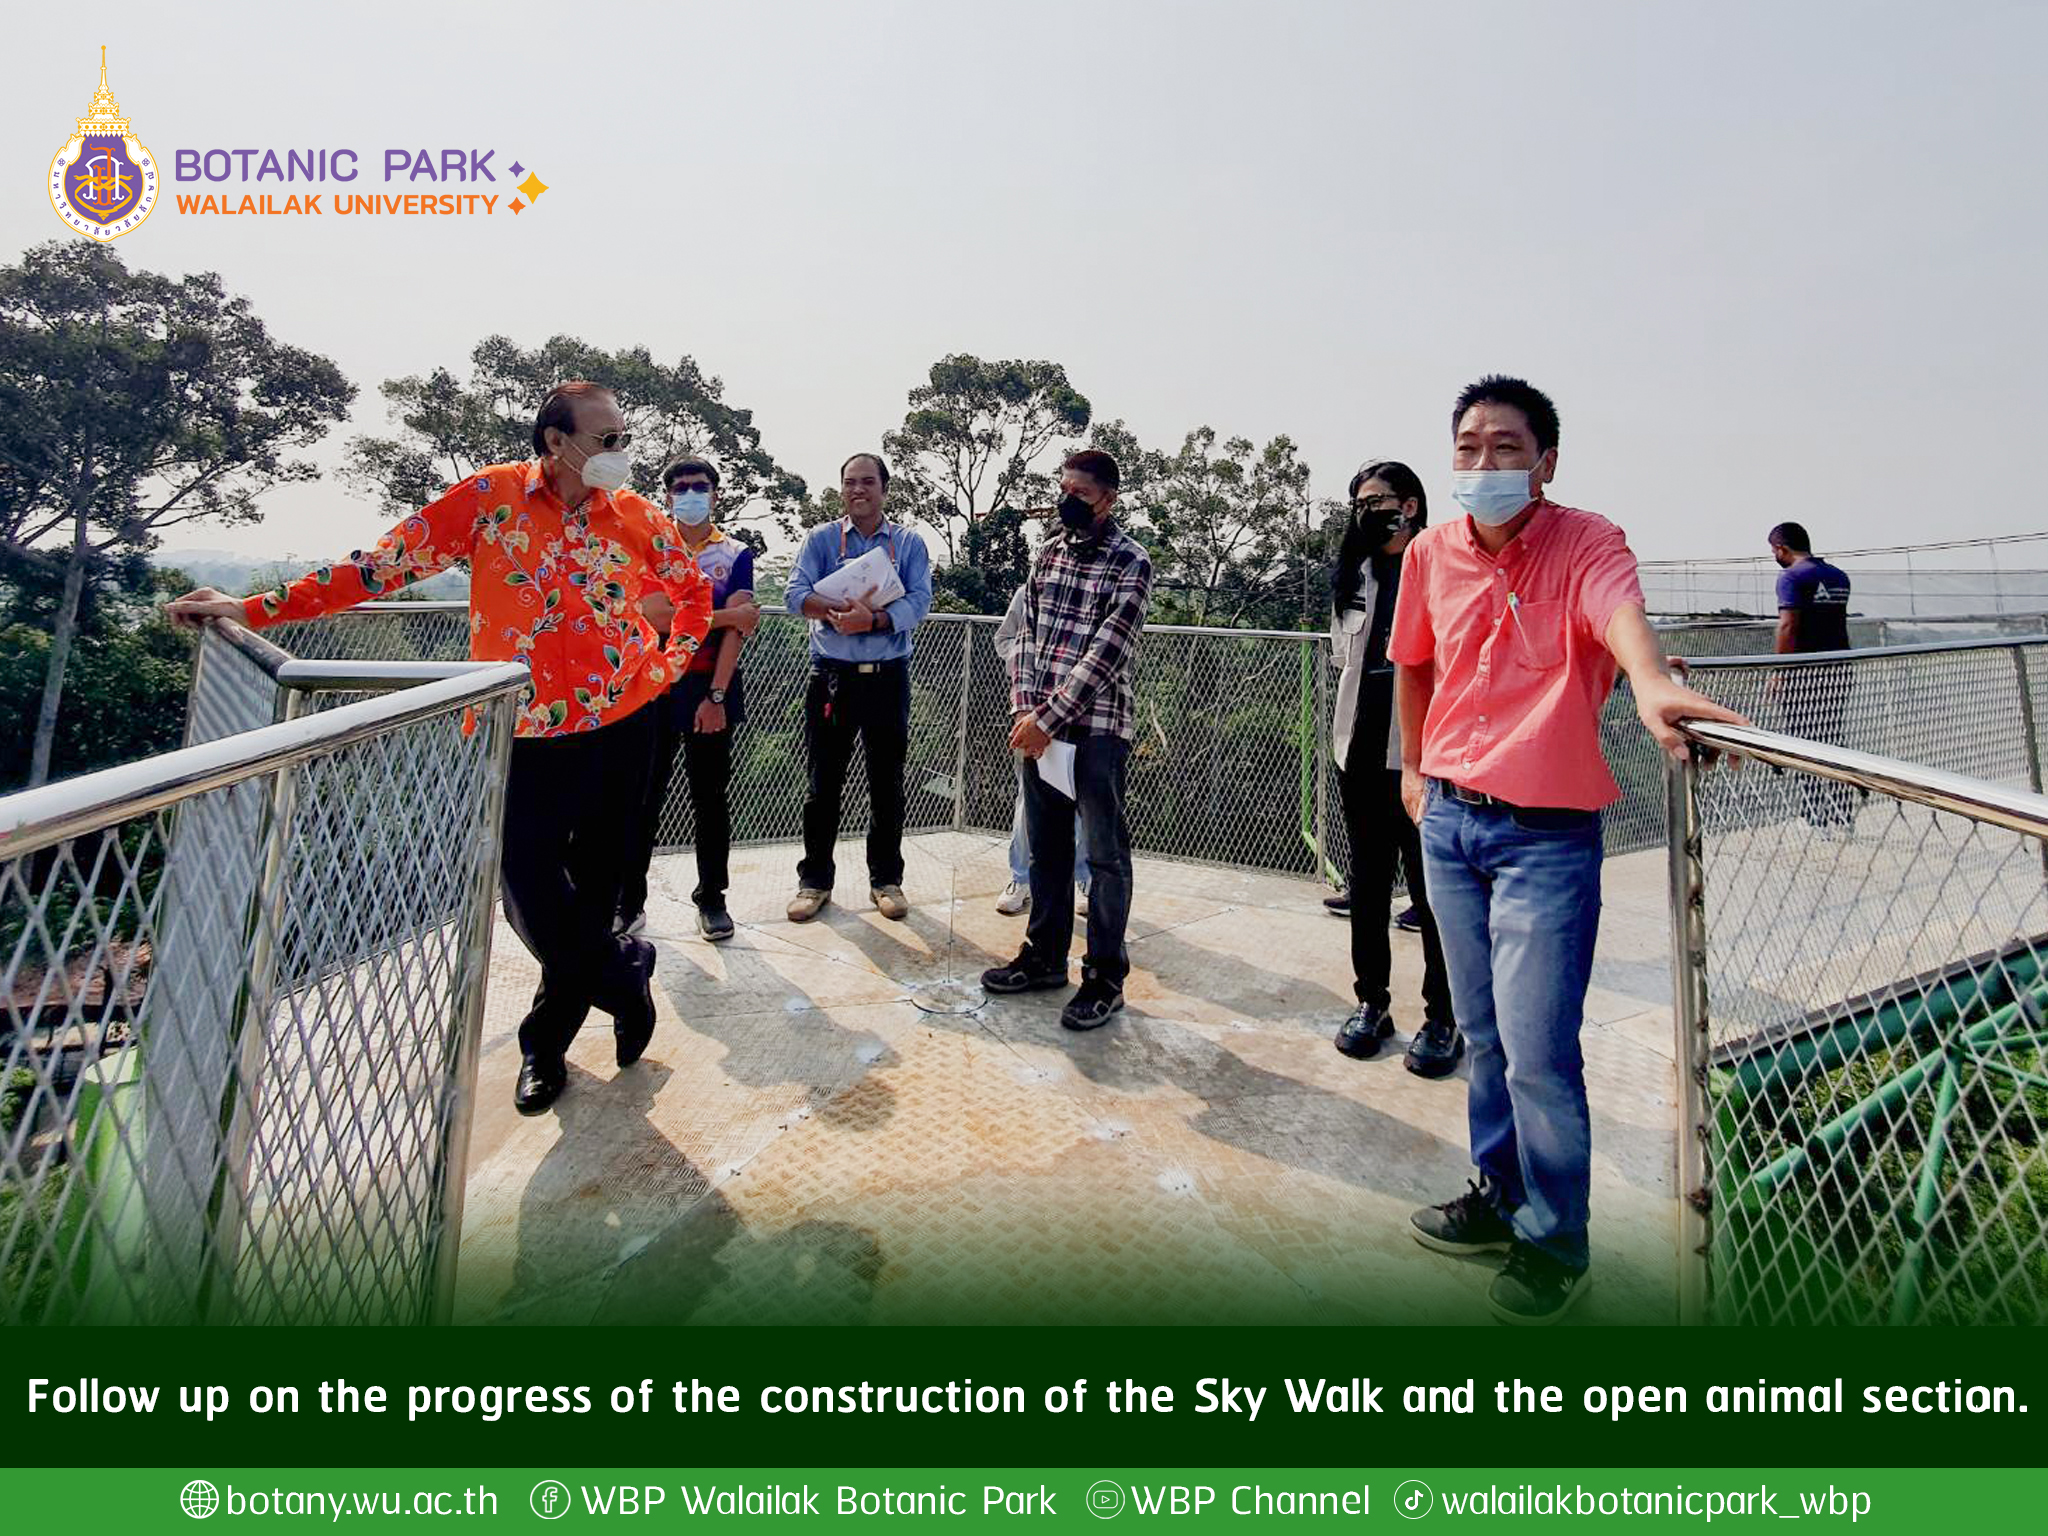 Follow up on the progress of the construction of the Sky Walk and the open animal section.